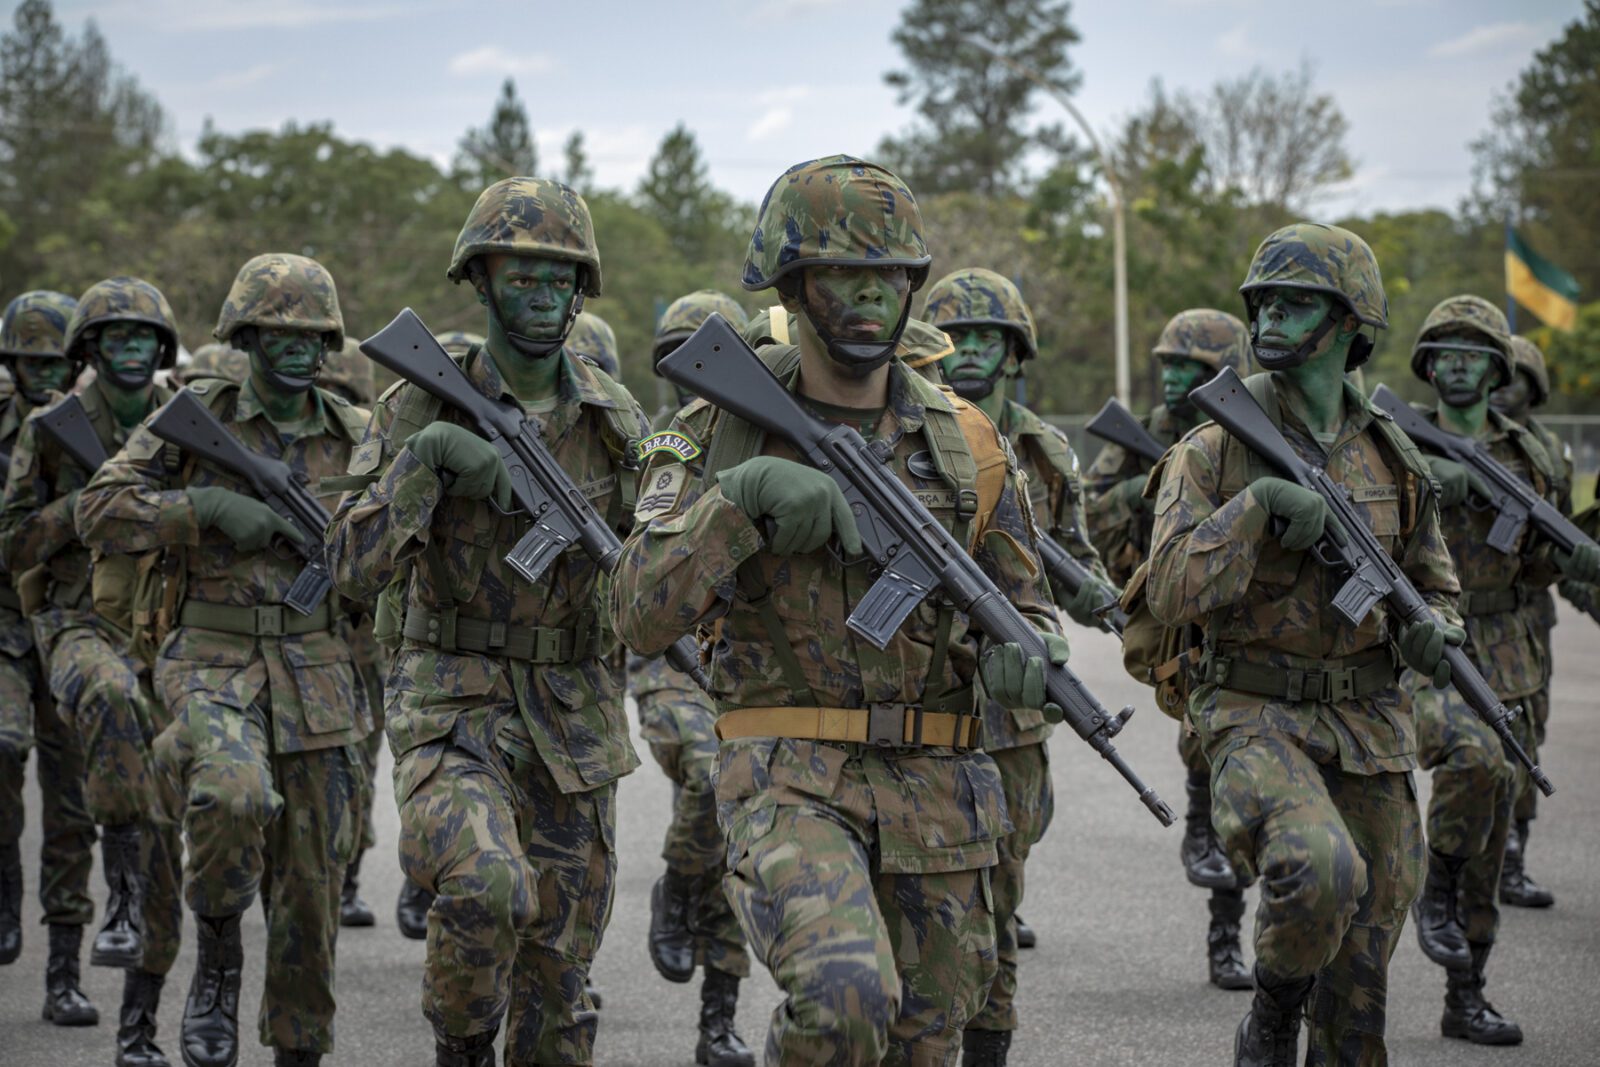 Vigilante, in defense of Brazil: the Air Force Infantry celebrates its 82nd anniversary